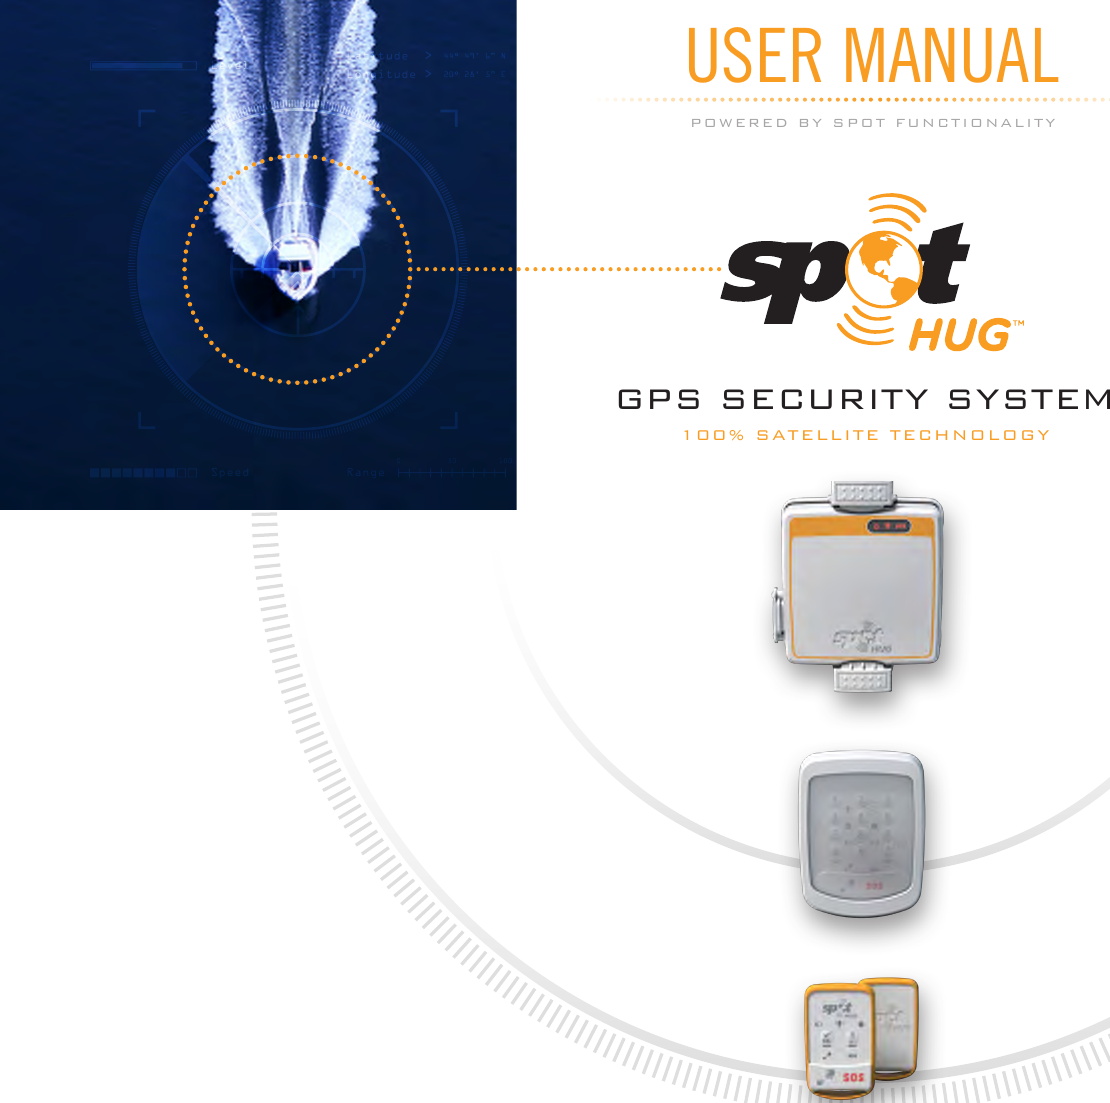 USER MANUALGPS Security SyStem100% Satellite technoloGypowered by spot functionality